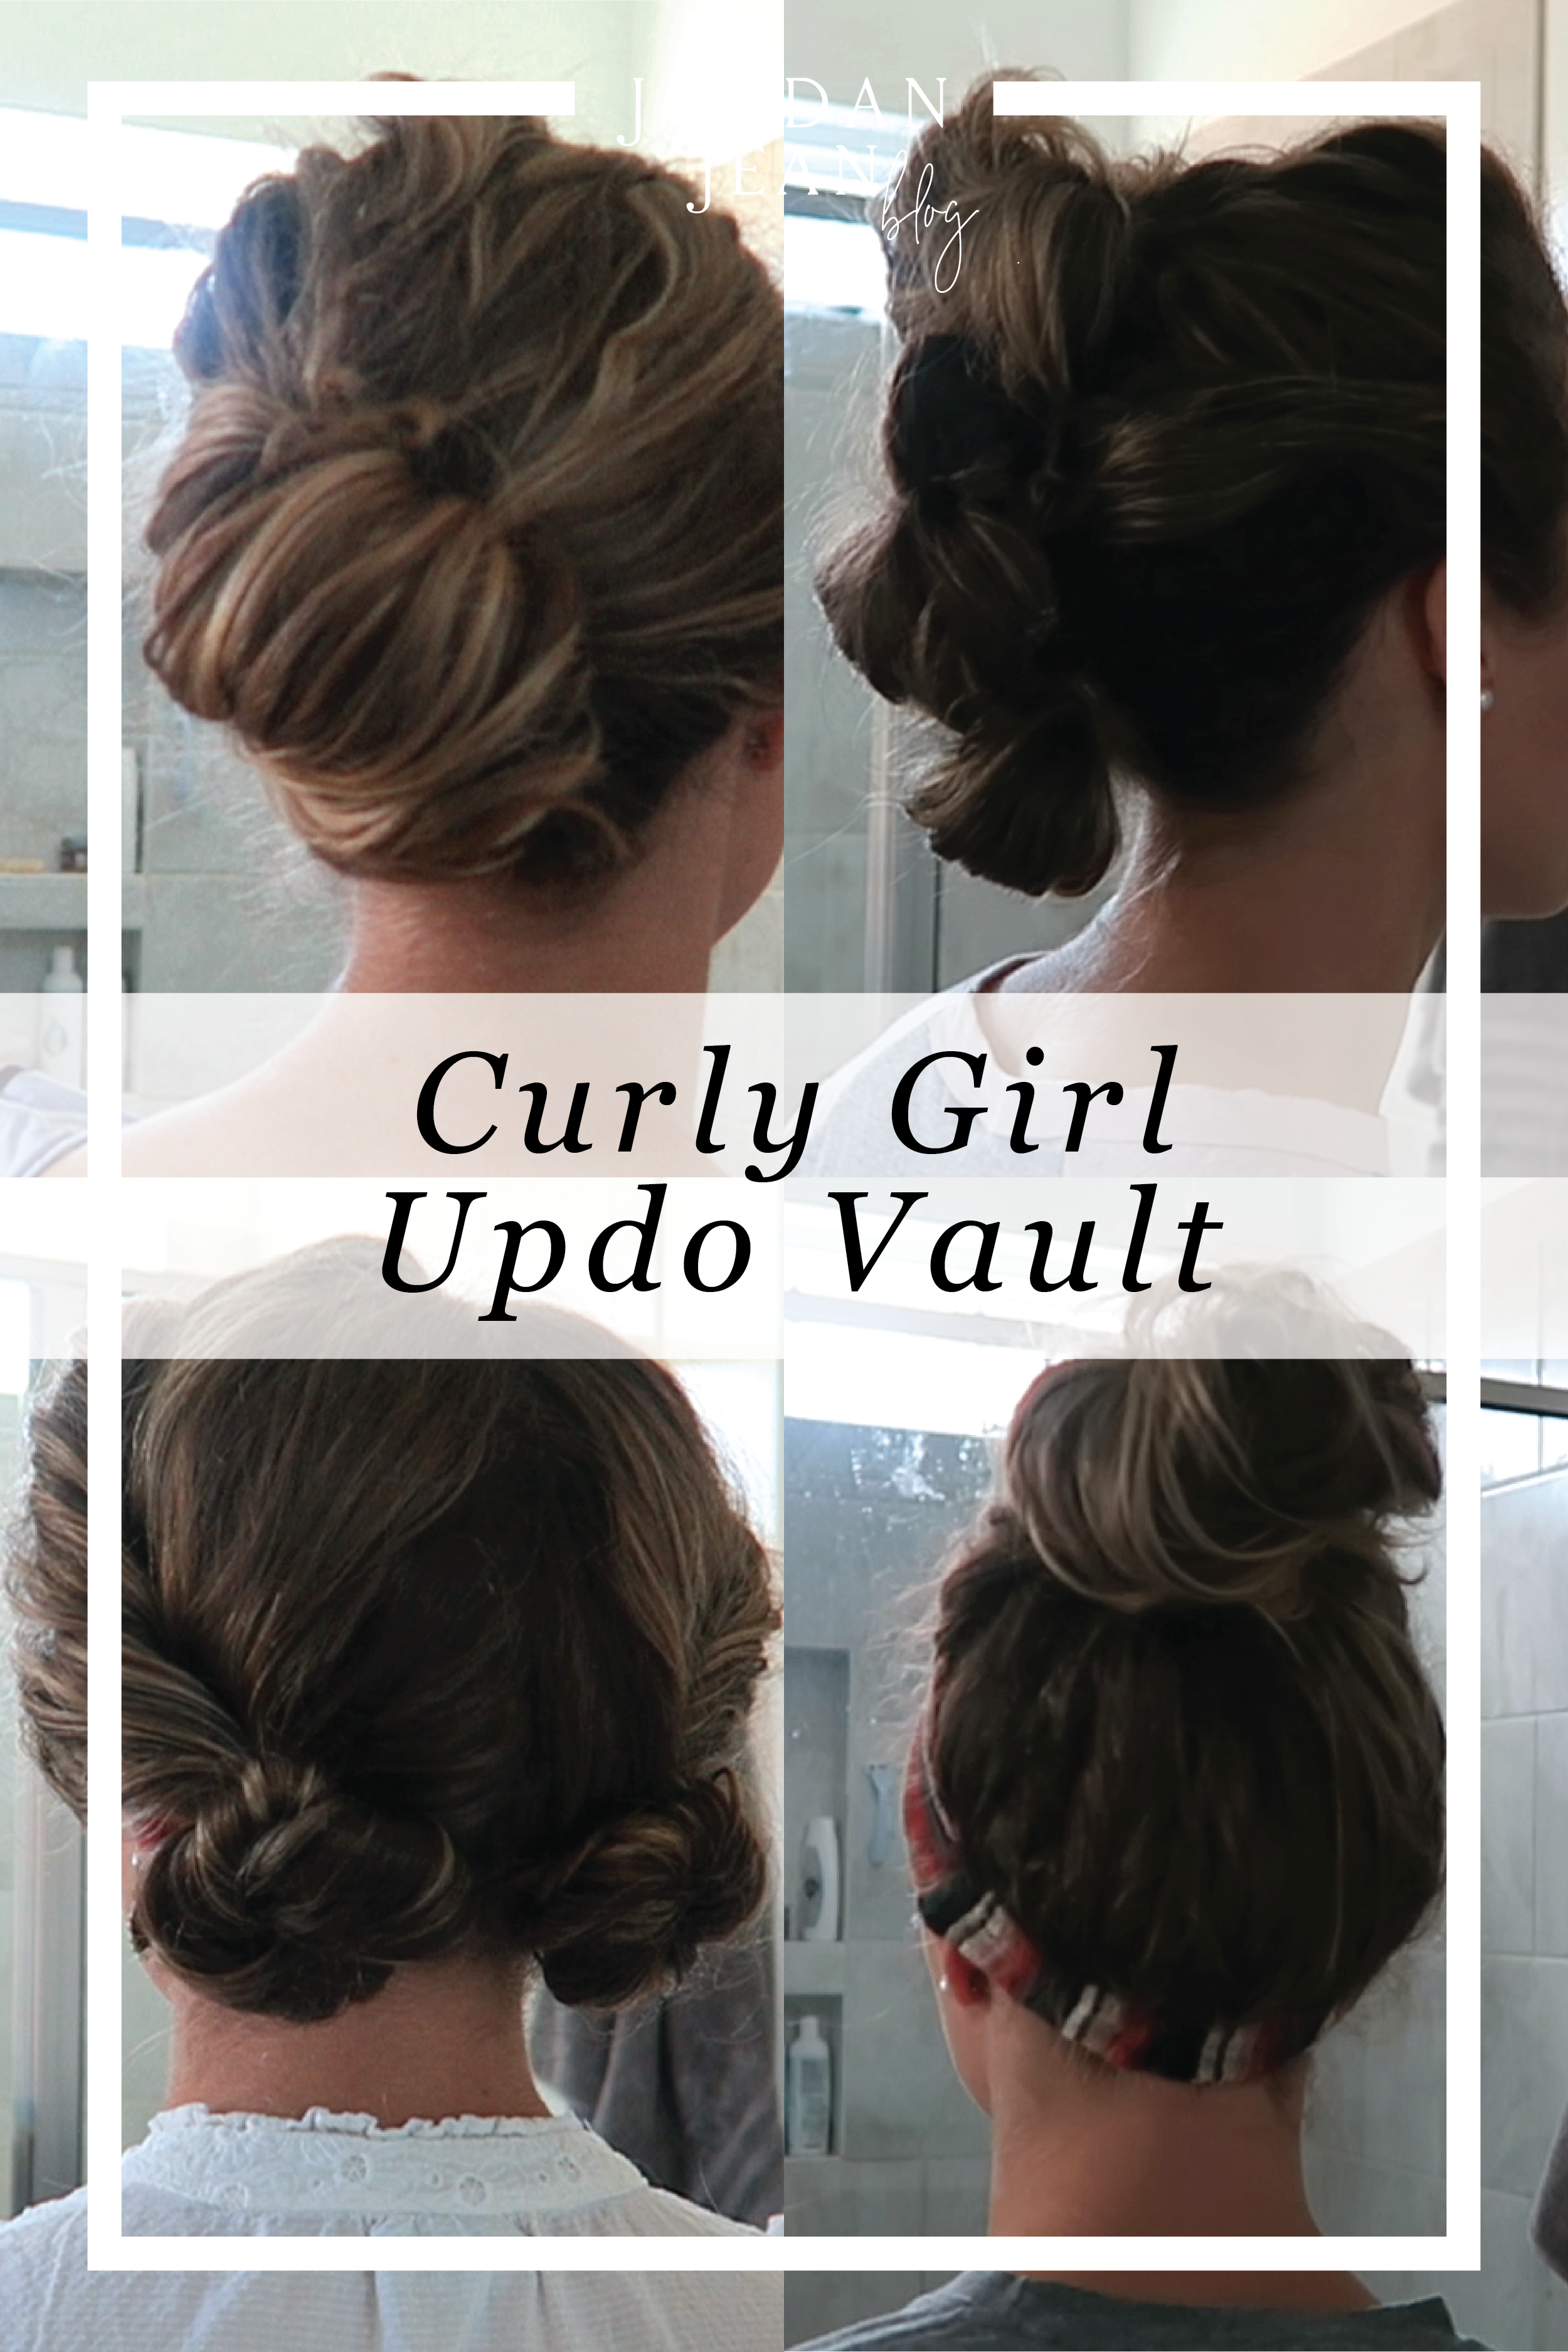 Curly Girl updos